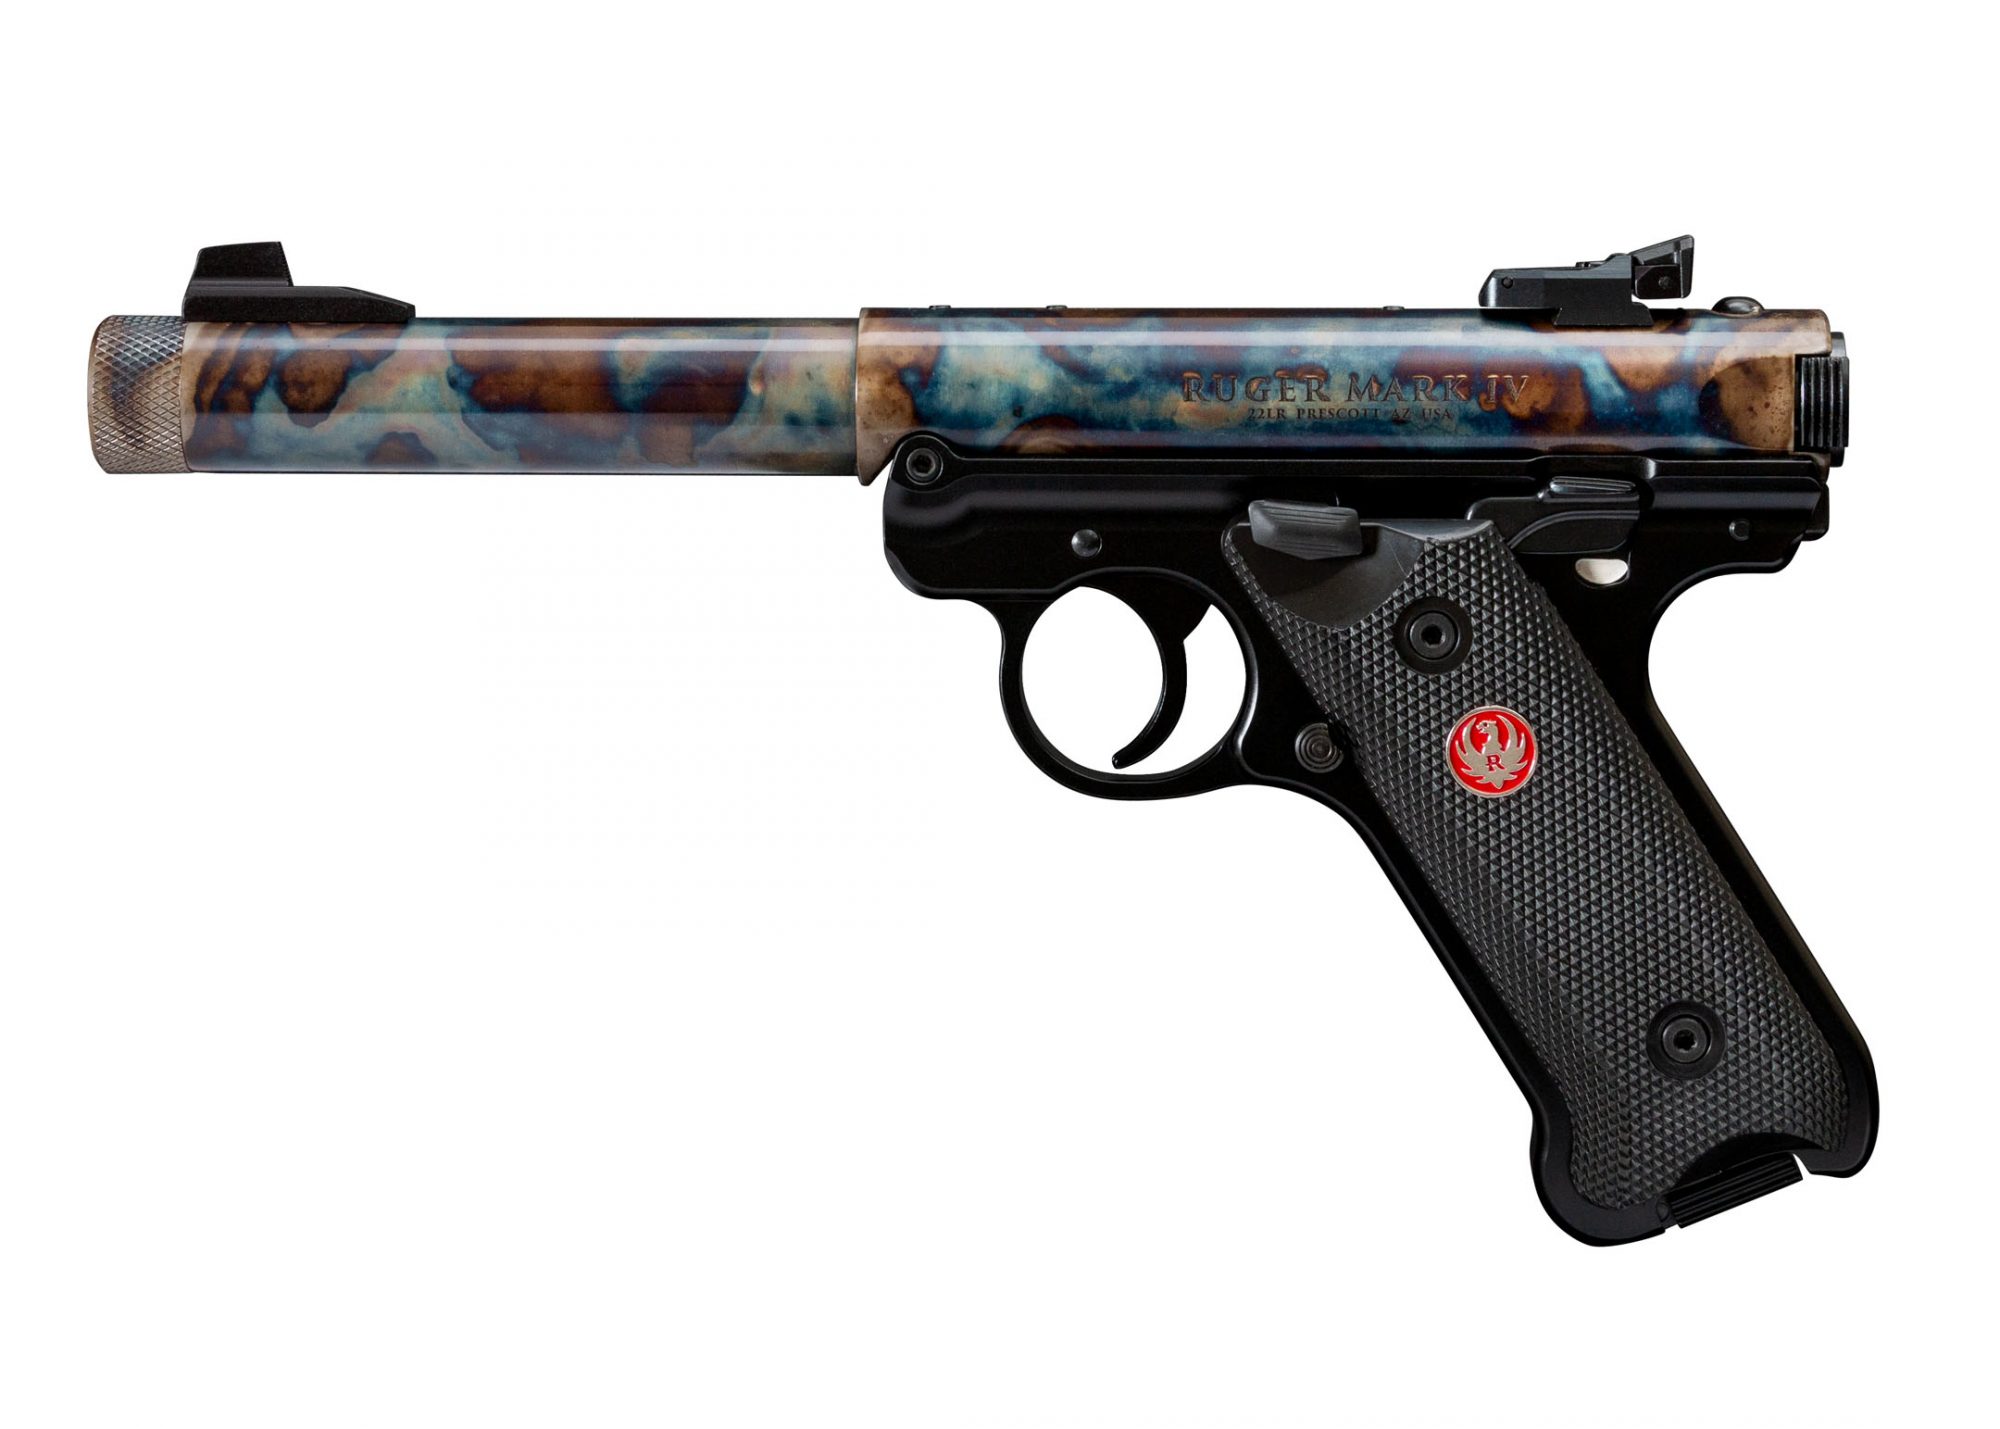 Ruger Mark IV with threaded barrel featuring bone charcoal case colors by Turnbull Restoration